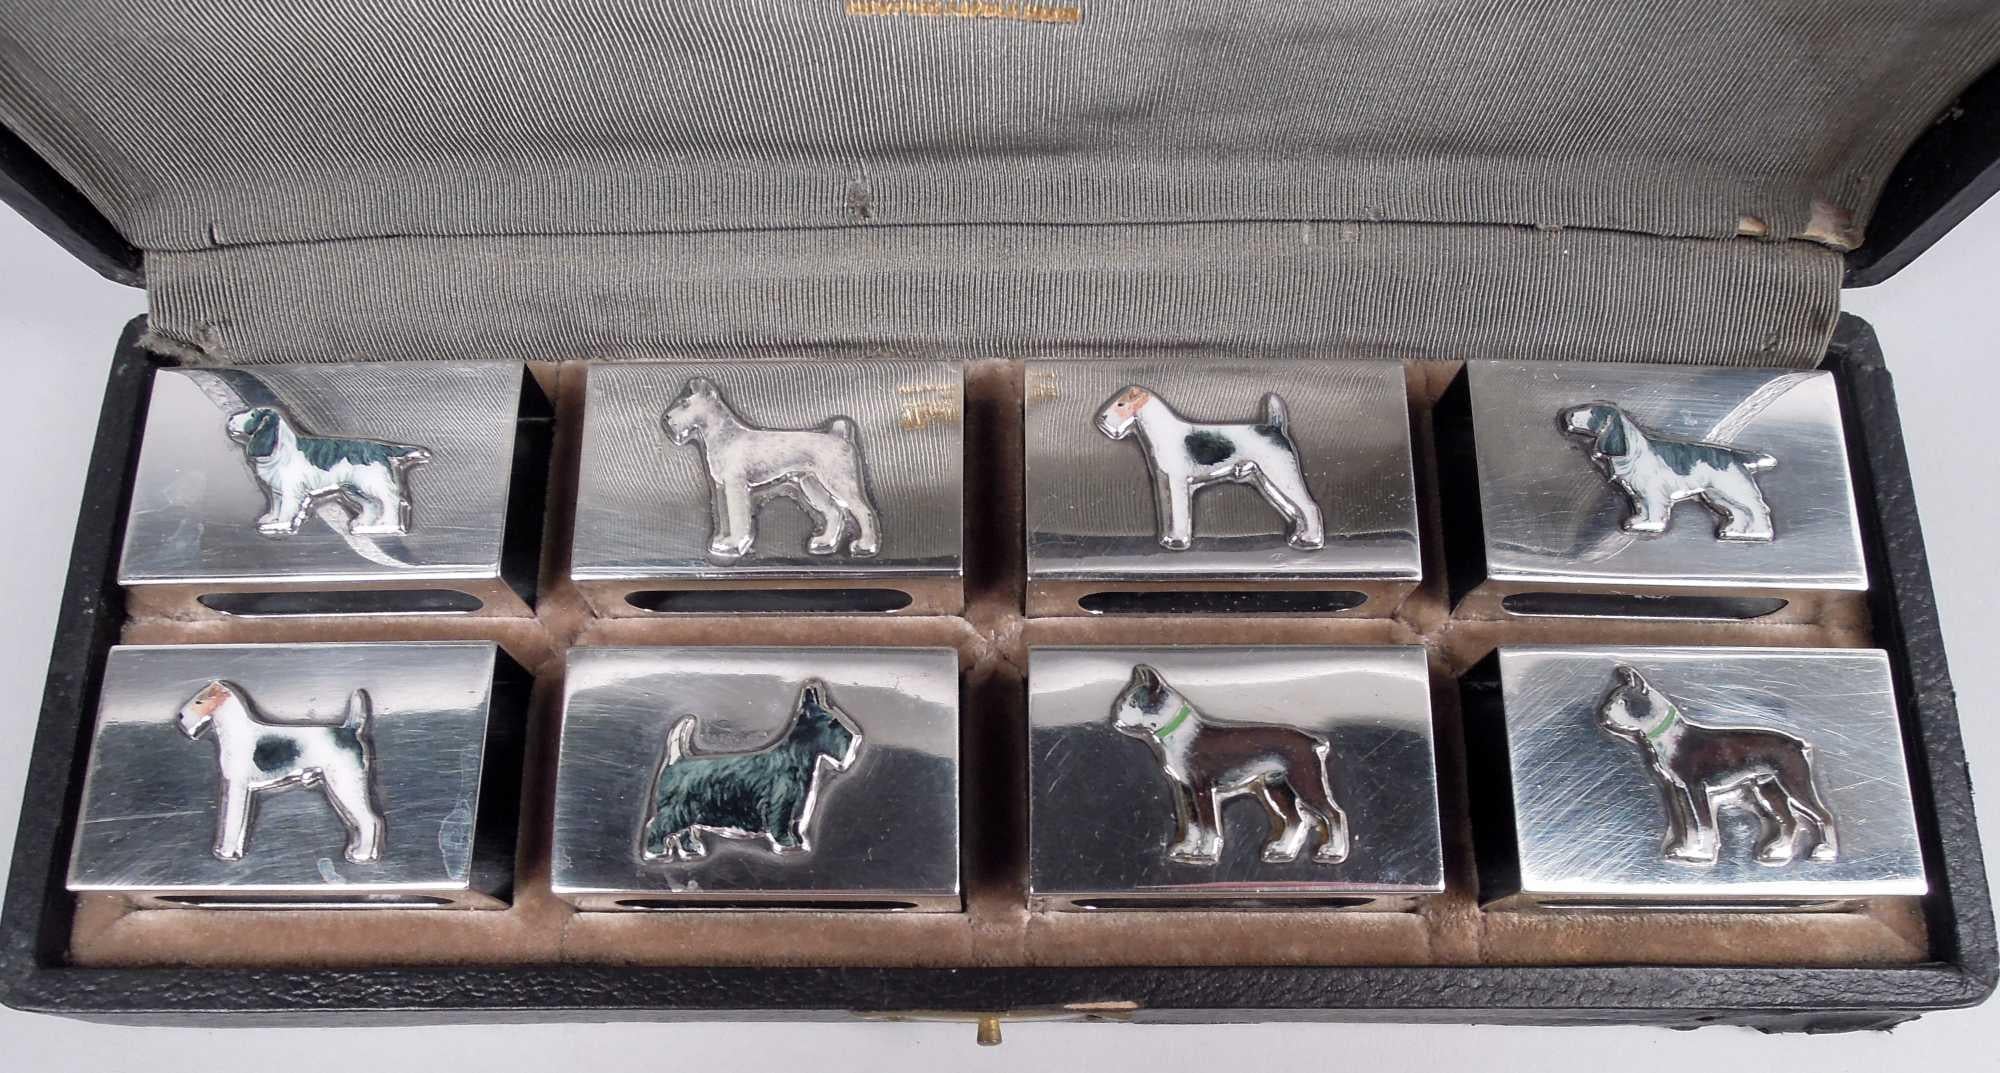 Set of 8 American Modern sterling silver matchbox holders, ca 1920. Retailed by Udall & Ballou in New York. Rectangular with open ends; sides have cutout tubes. On each is applied enameled dog. Five breeds represented. On back engraved block